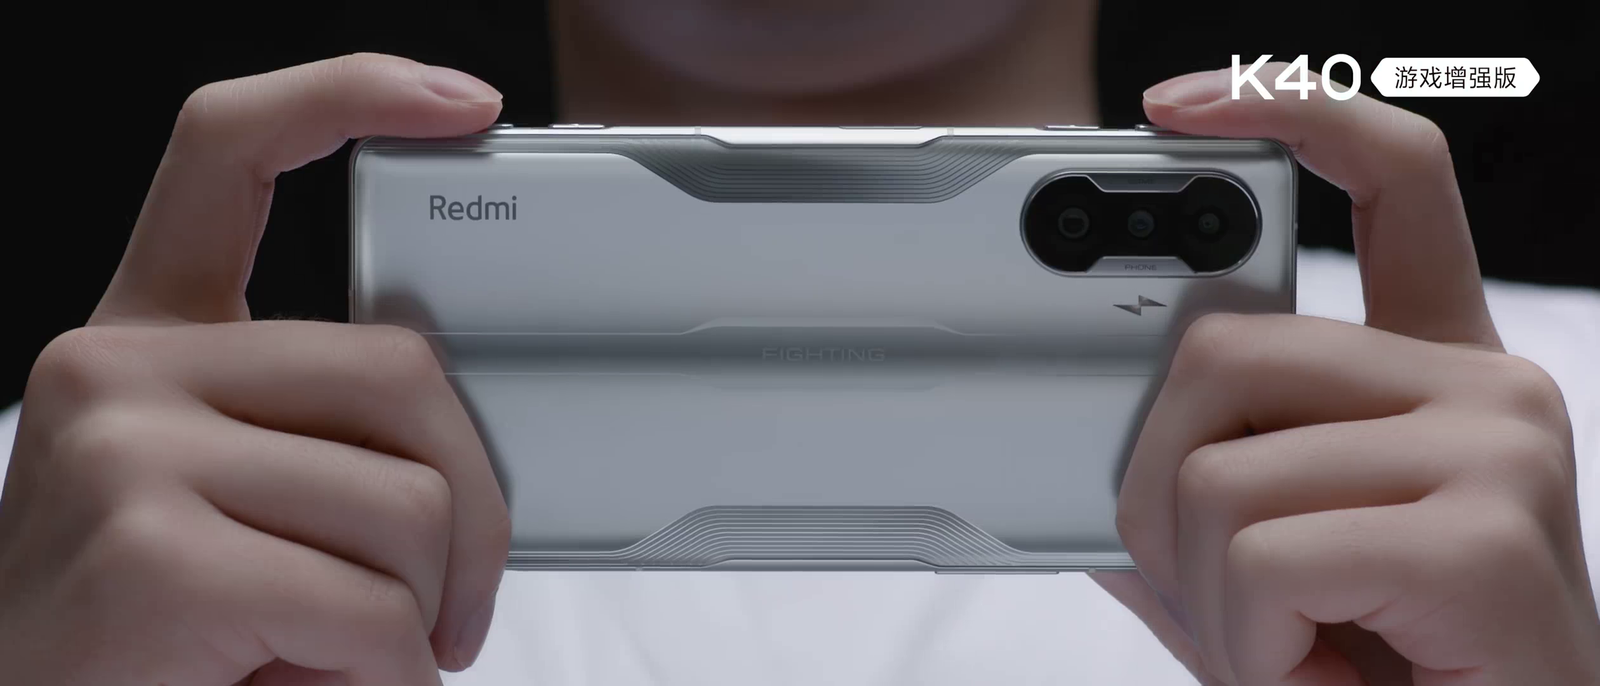 Redmi K40 Gaming Edition with 128GB RAM